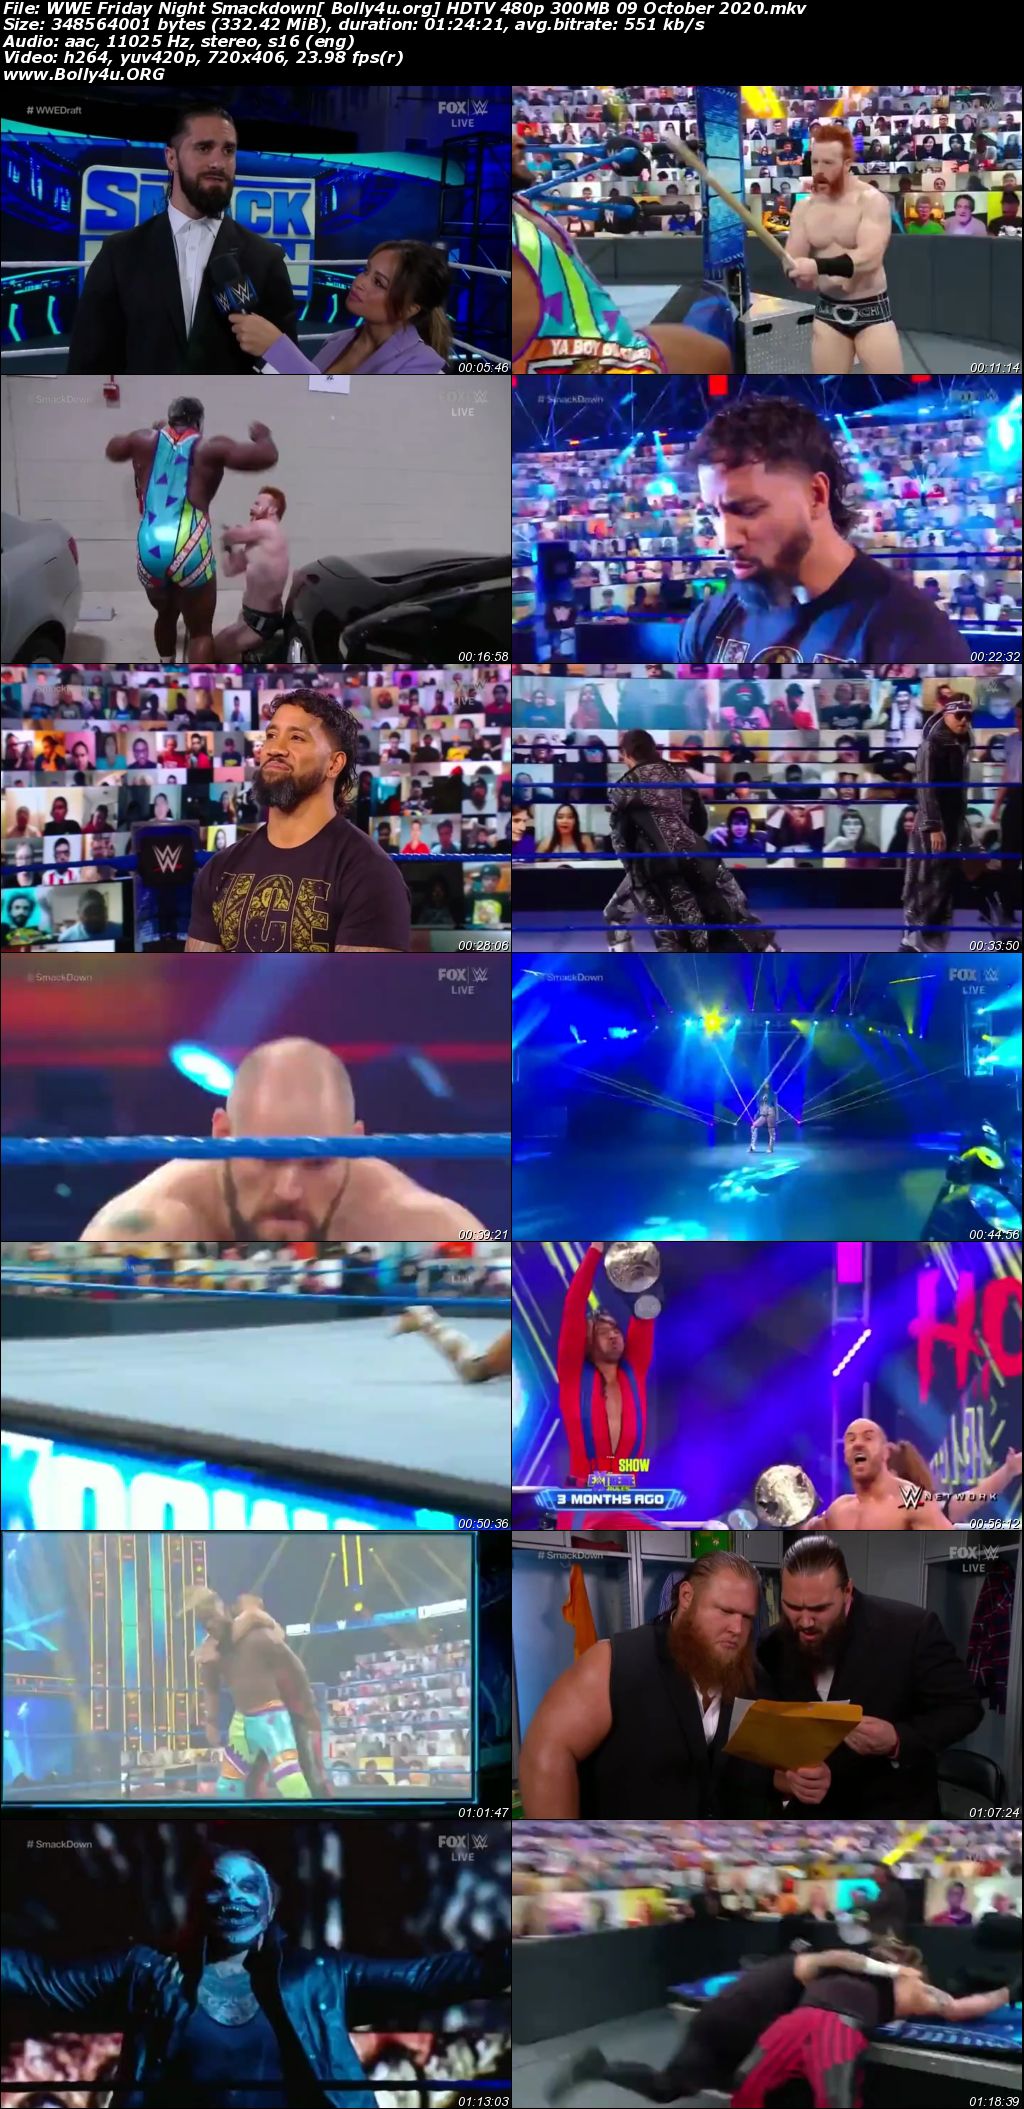 WWE Friday Night Smackdown HDTV 480p 300MB 09 October 2020 Download